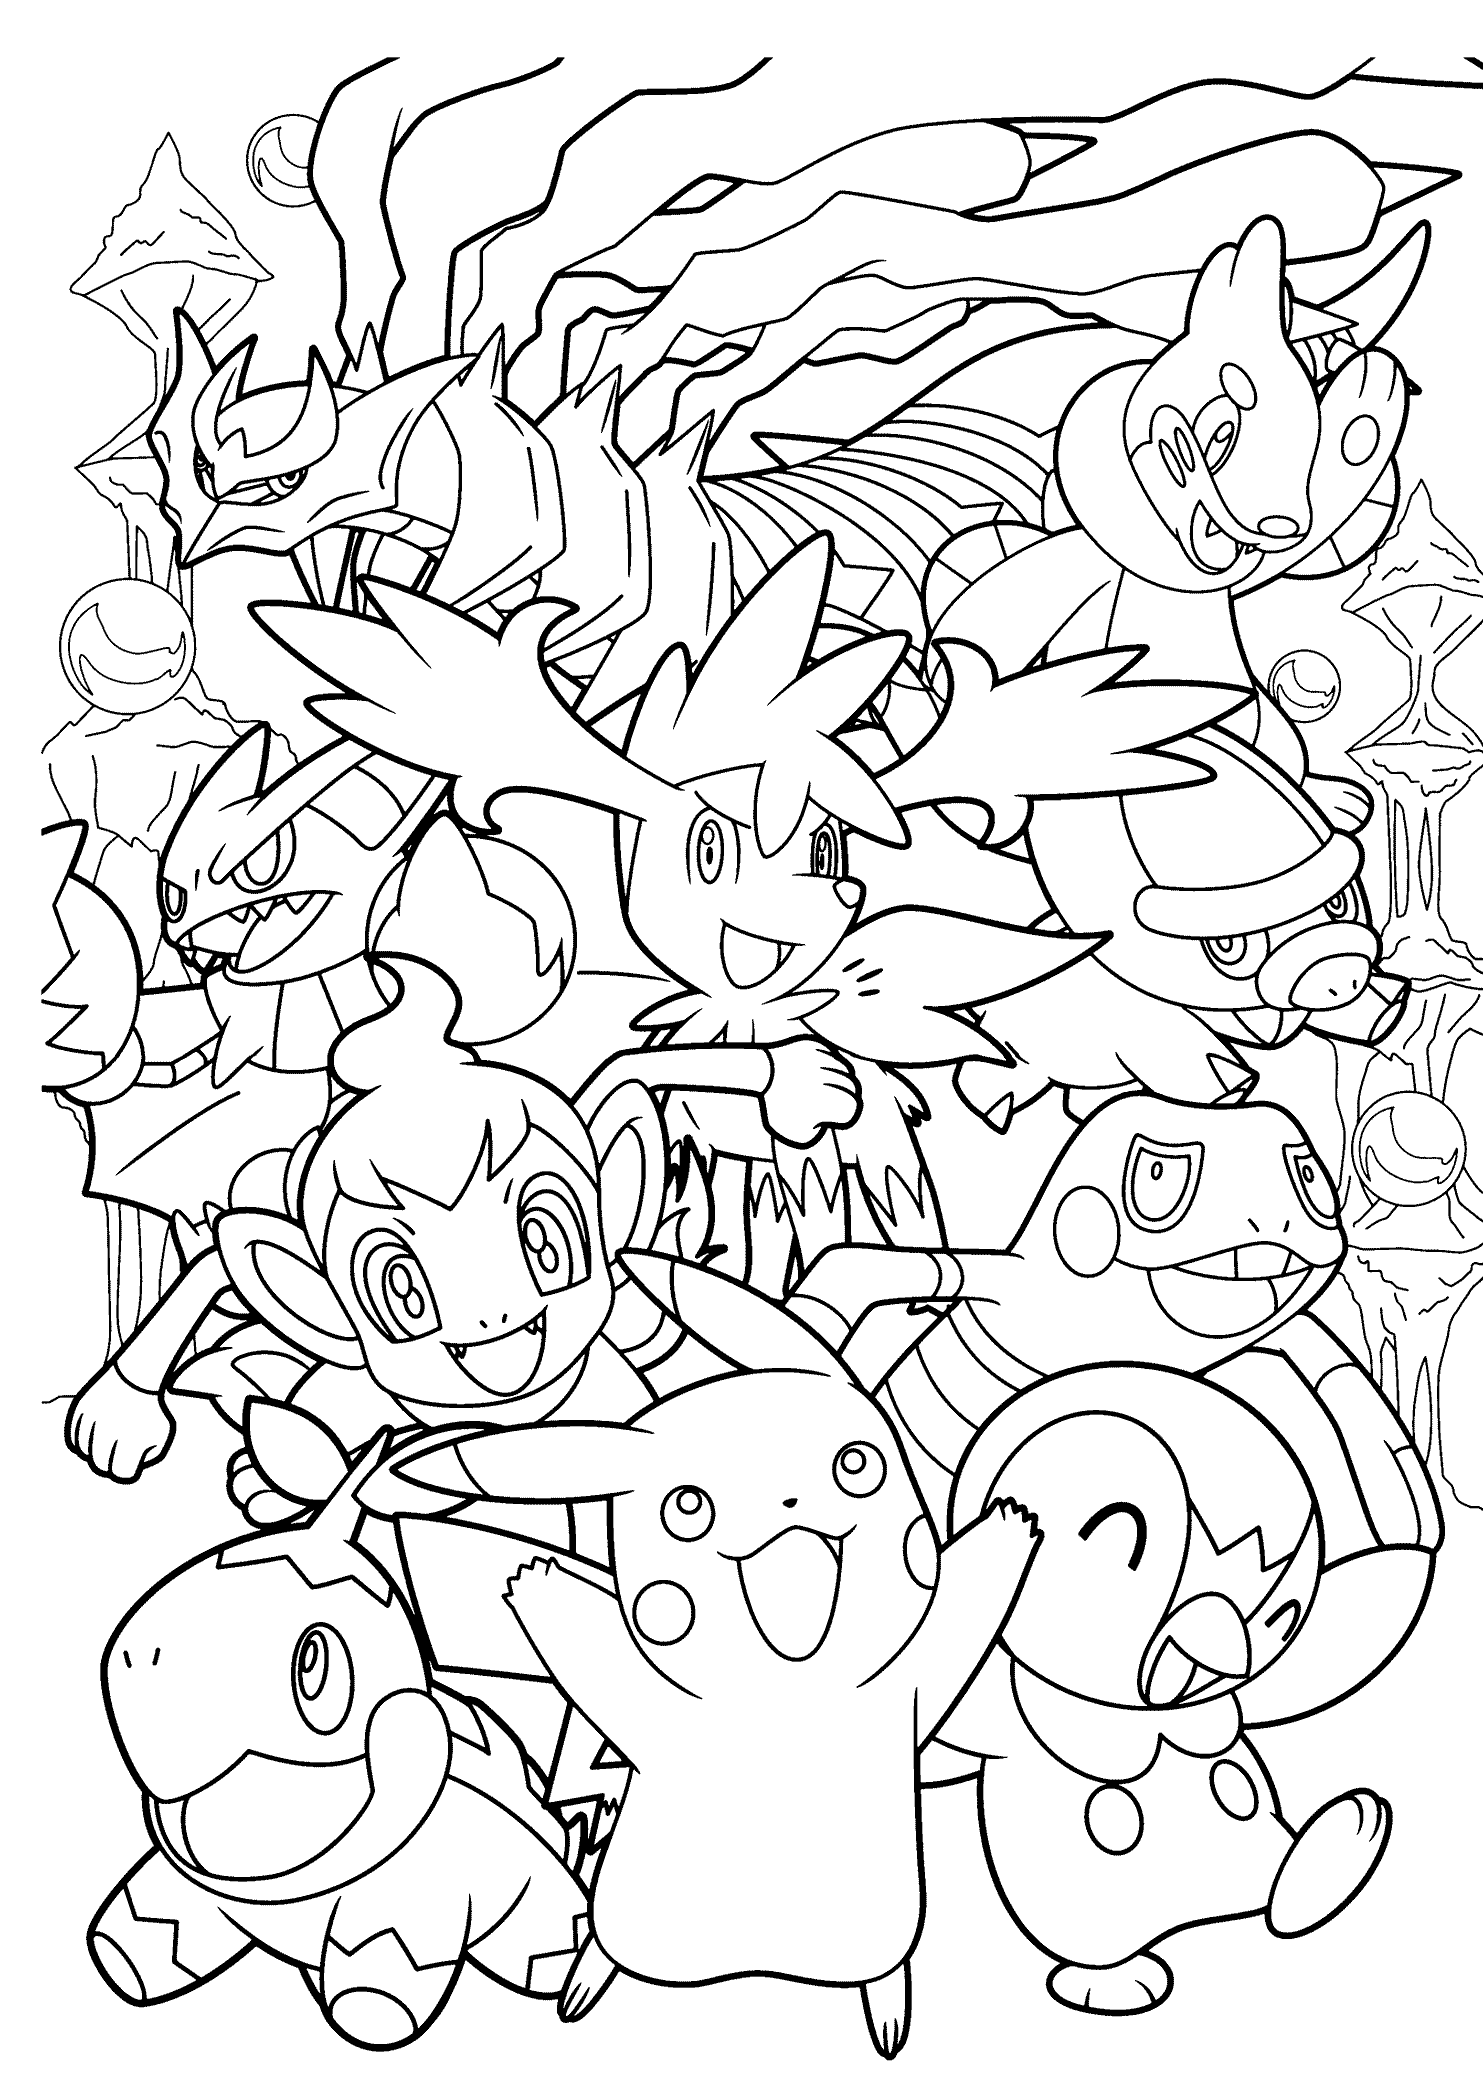 Free Pokemon Coloring Pages , Download Free Pokemon Coloring Pages ...